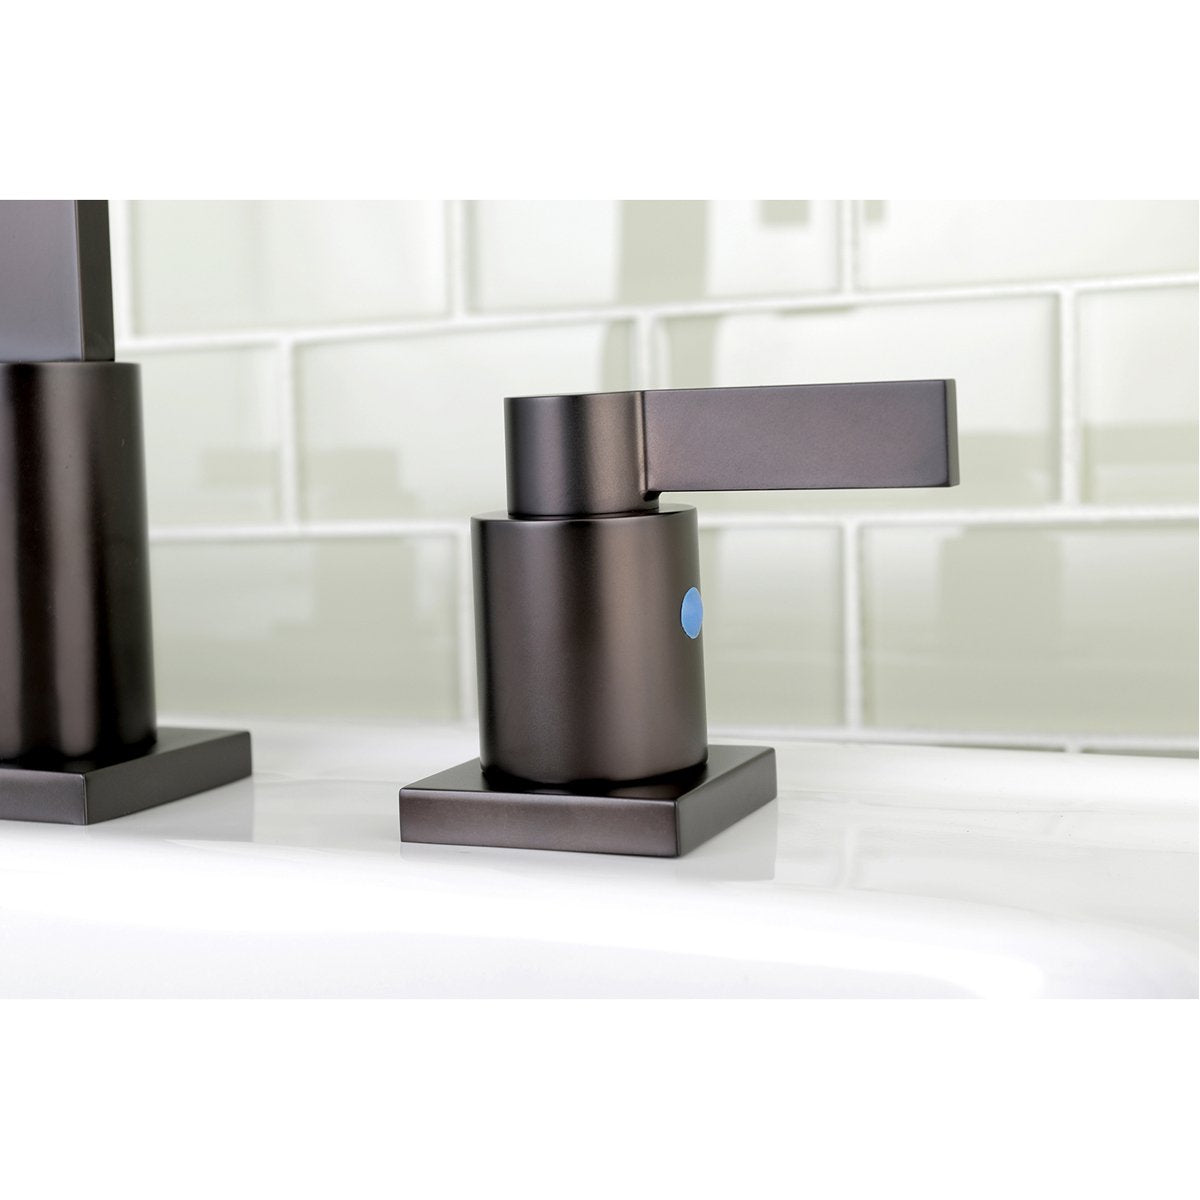 Kingston Brass NuvoFusion Fauceture Widespread Bathroom Faucet